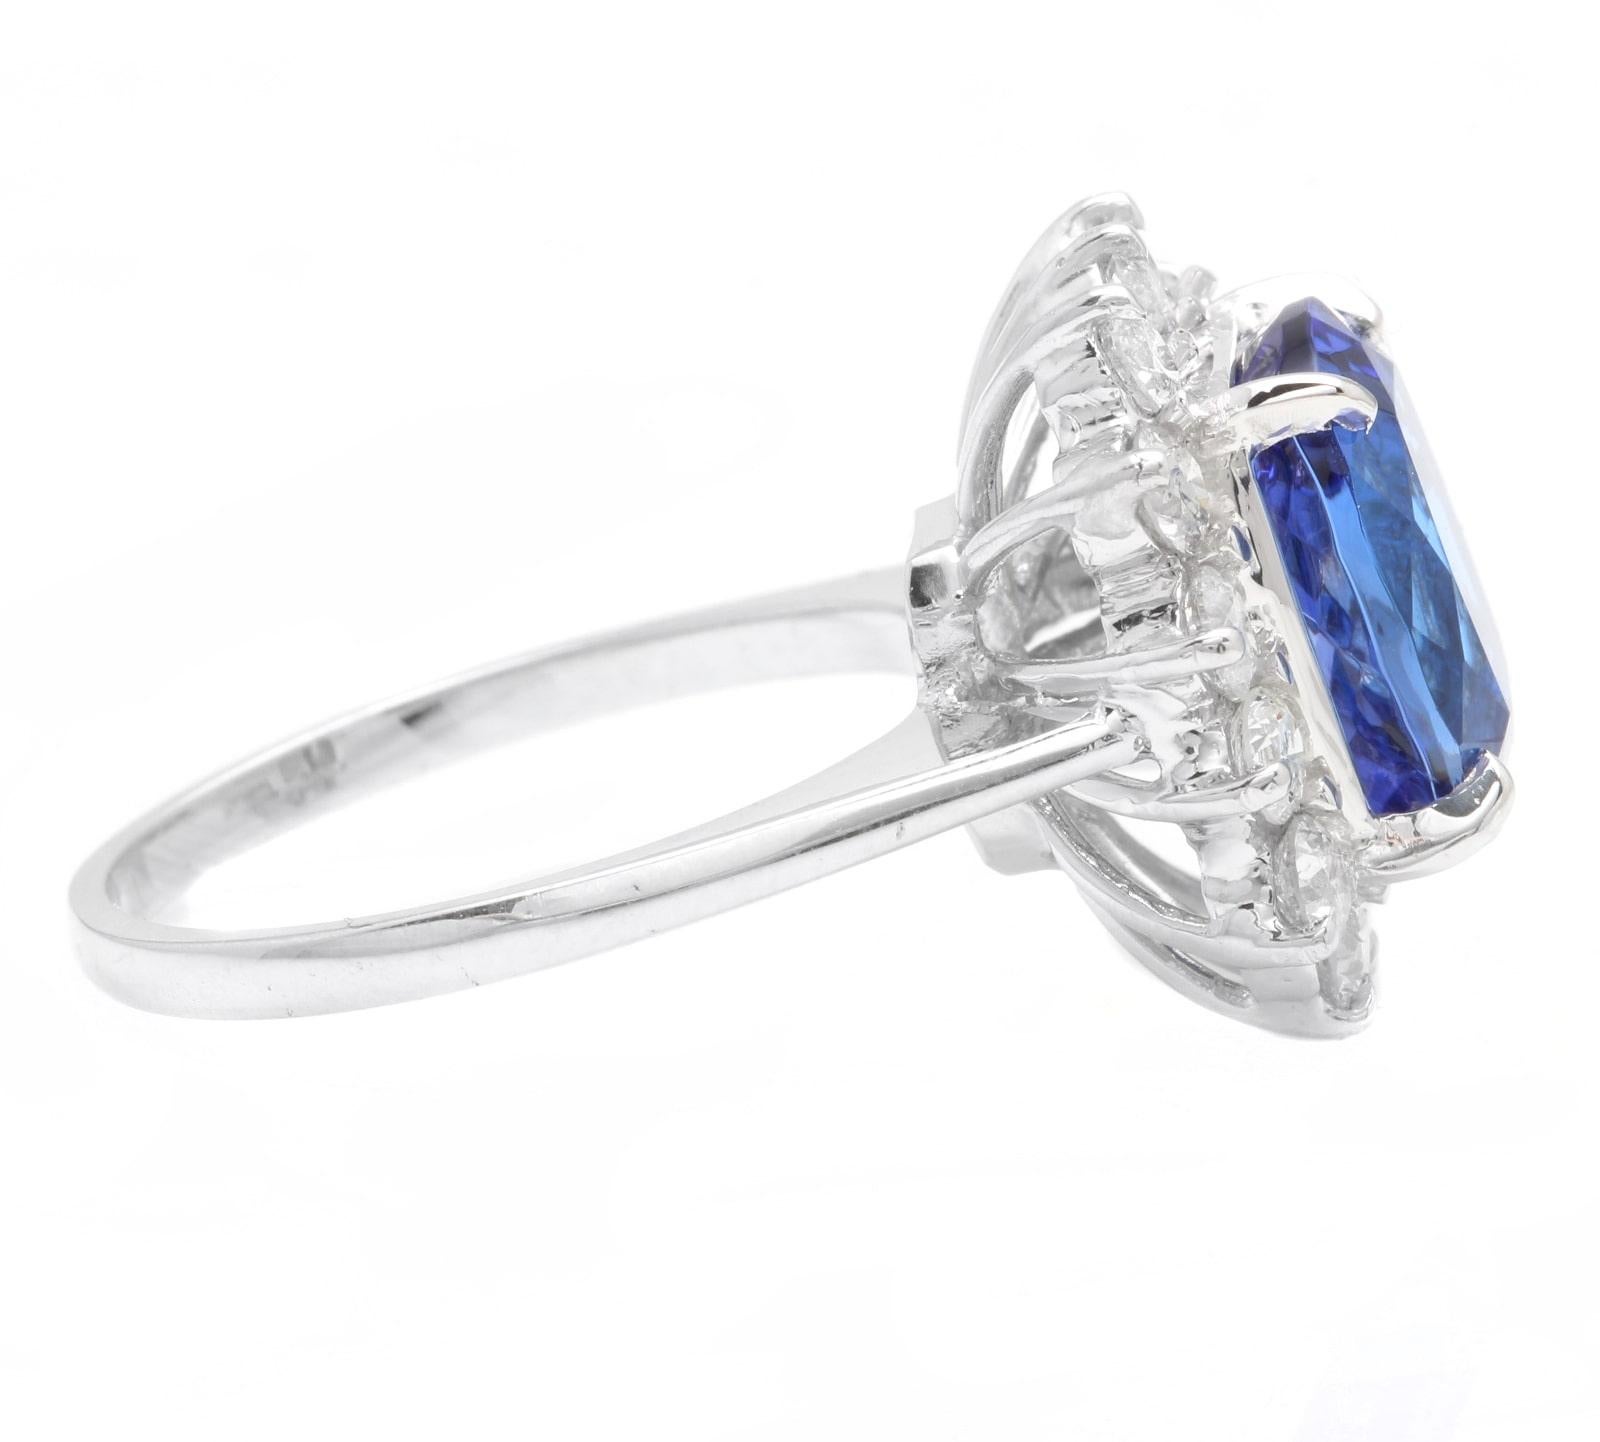 Mixed Cut 5.60ct Natural Very Nice Looking Tanzanite and Diamond 14K Solid White Gold Ring For Sale